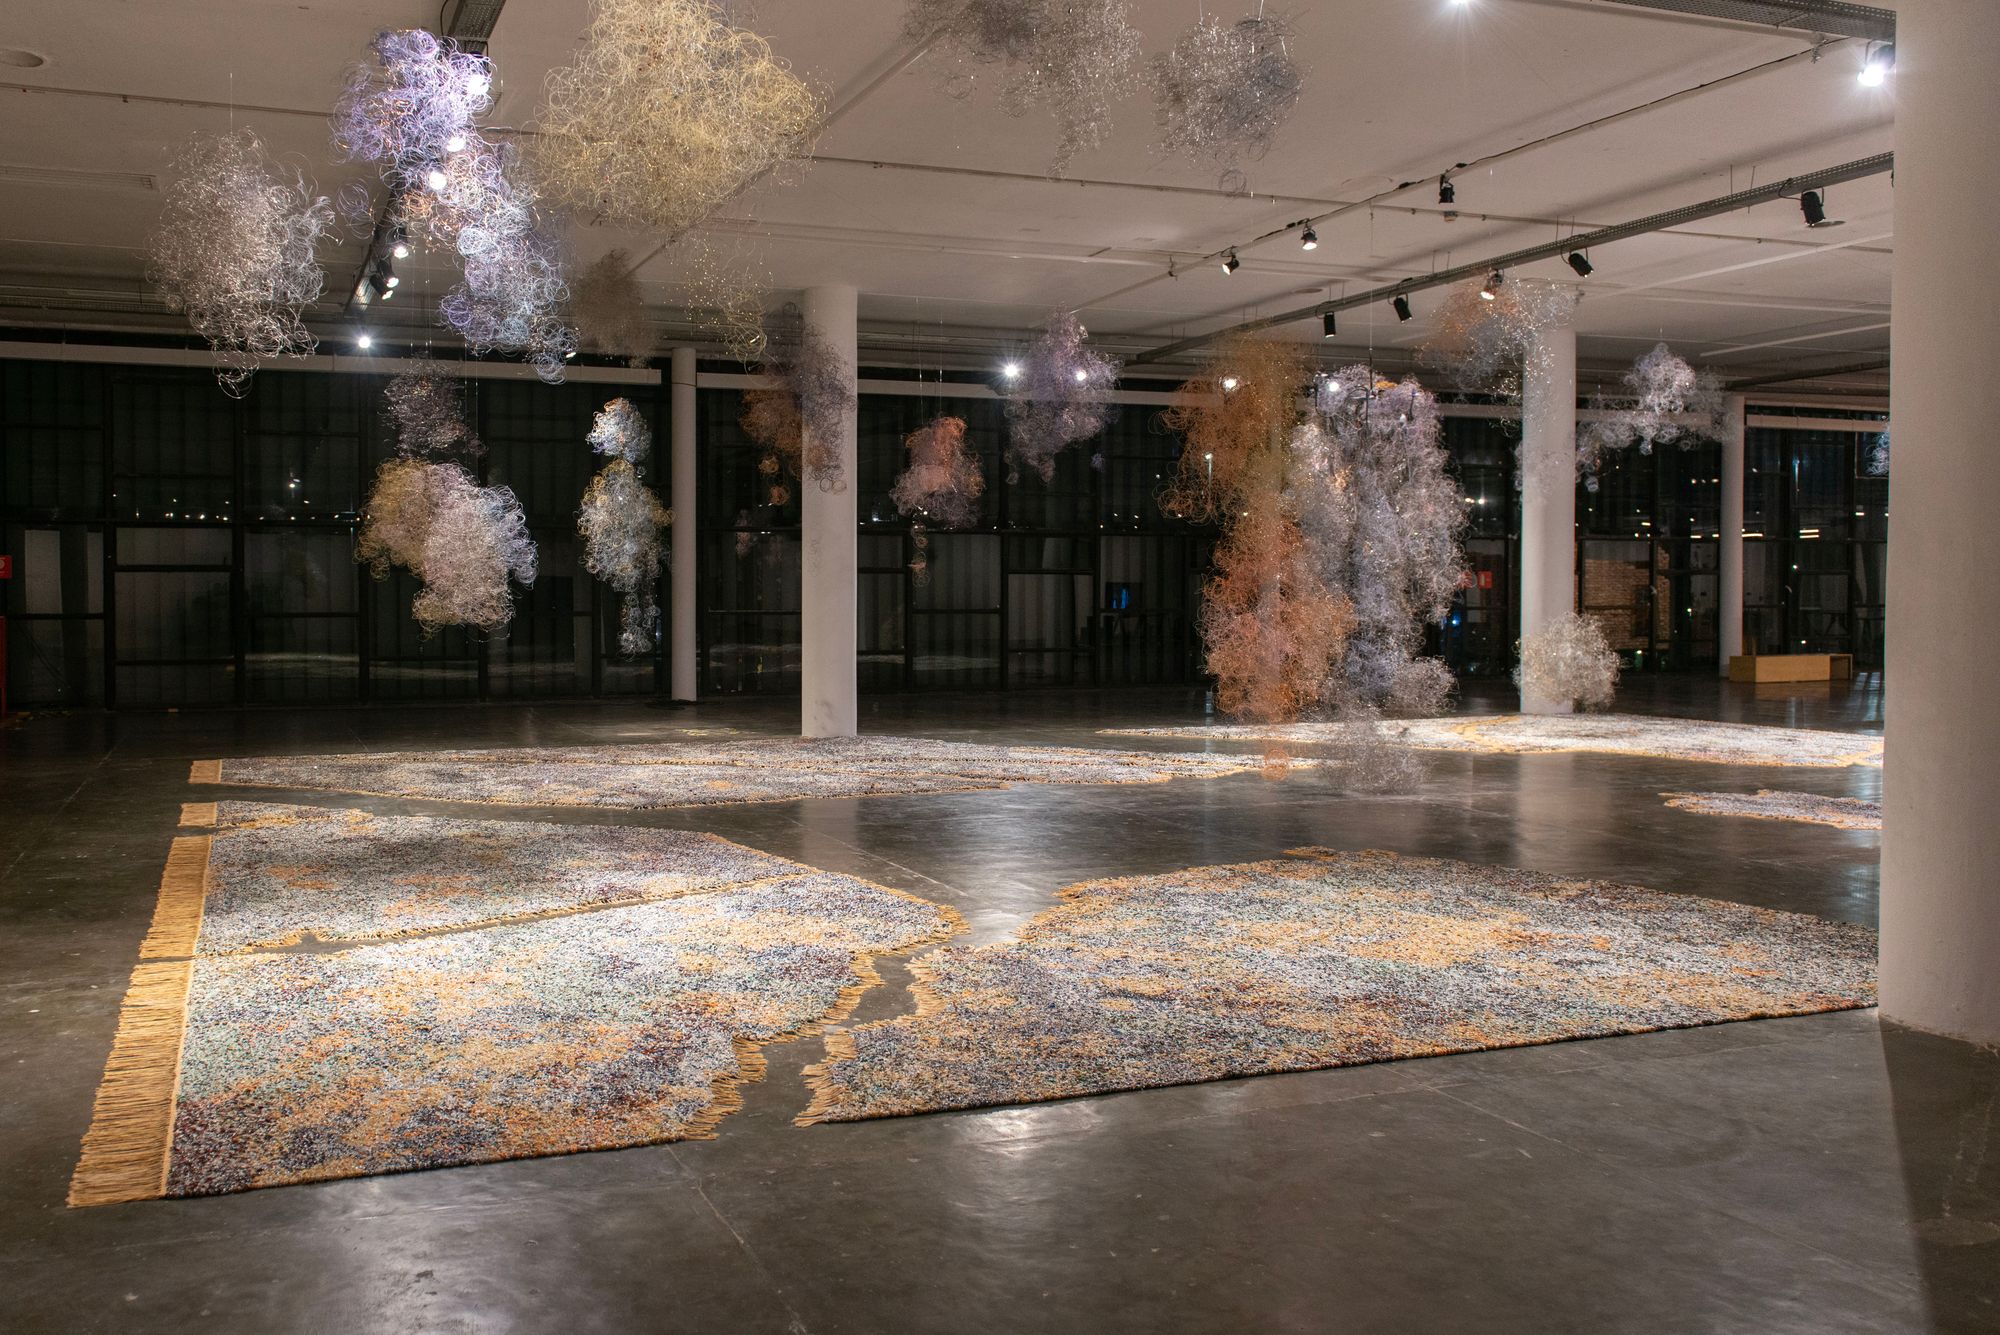 Pastel cloud-like structures extend from the ceiling of a gallery space, hanging above a yellow-toned carpet that covers the floor in irregular bursts.